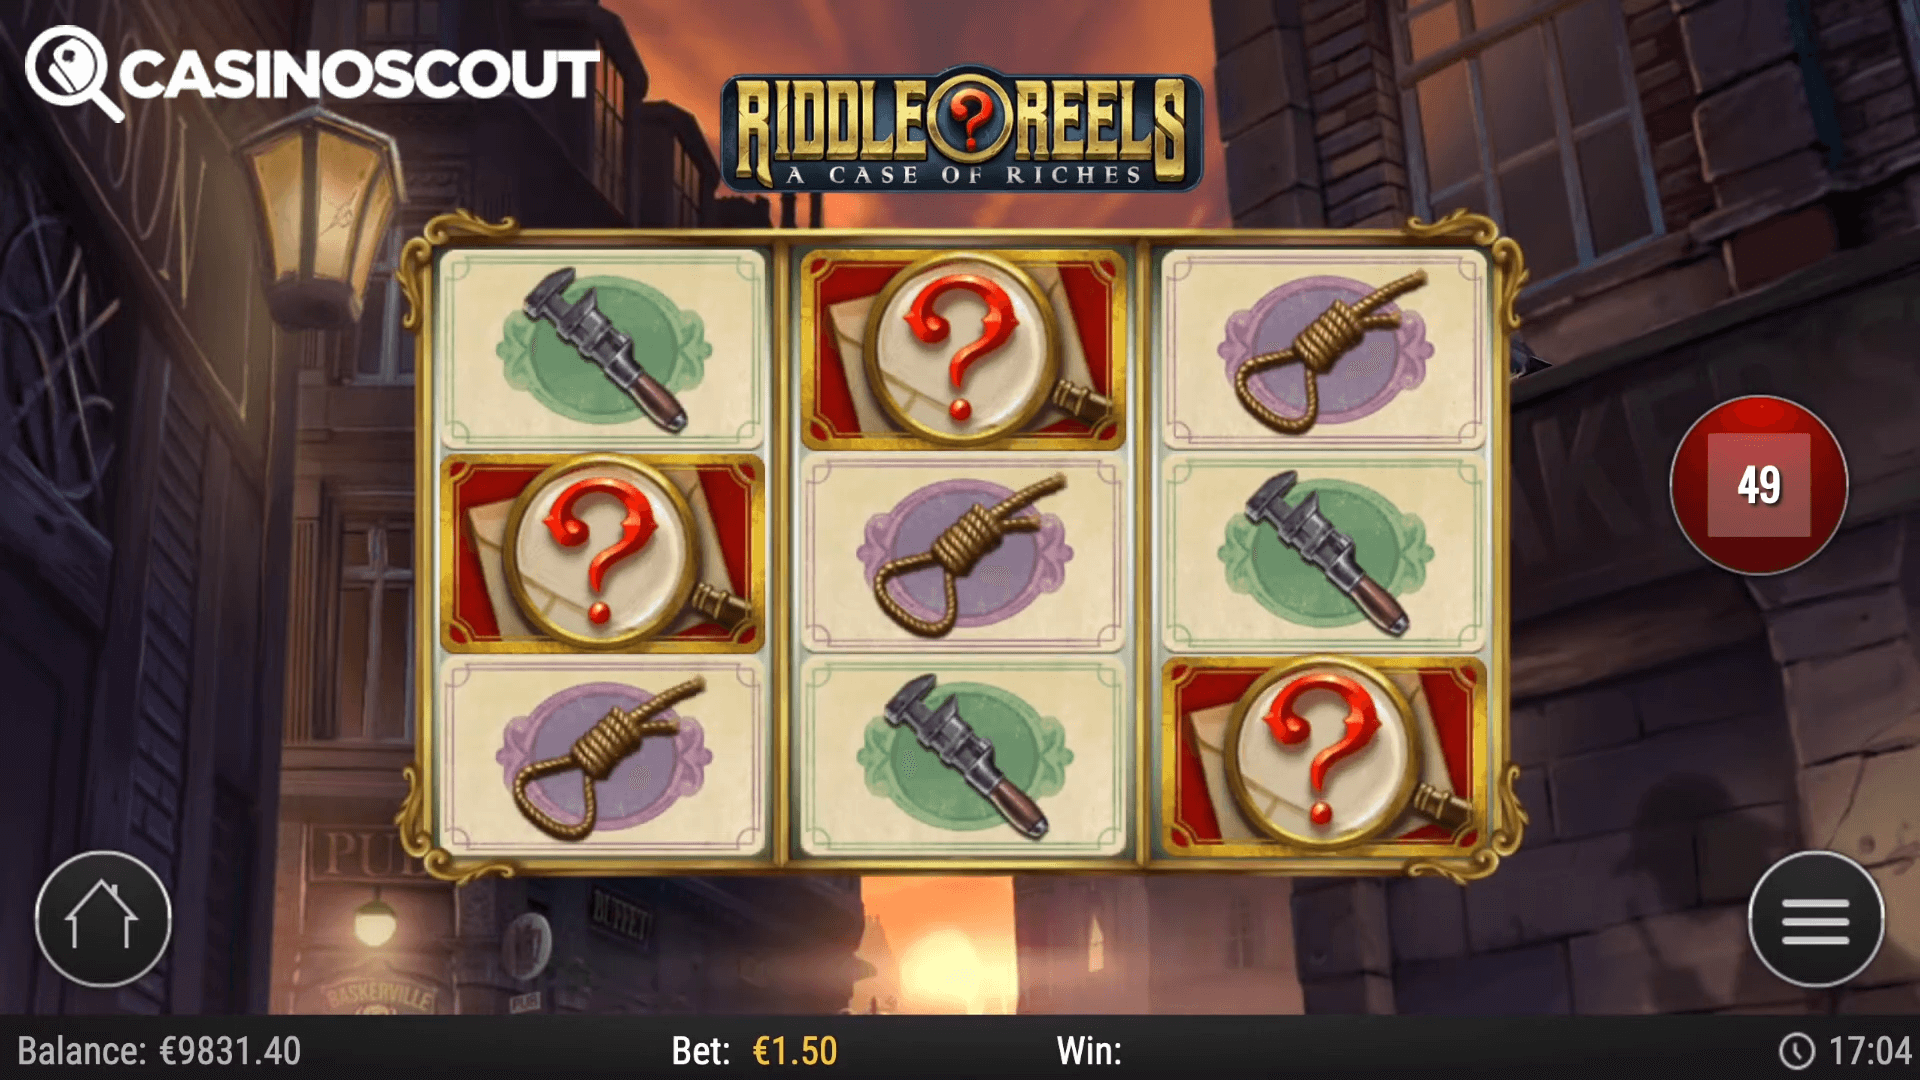 Riddle Reels: A Case of Riches Review